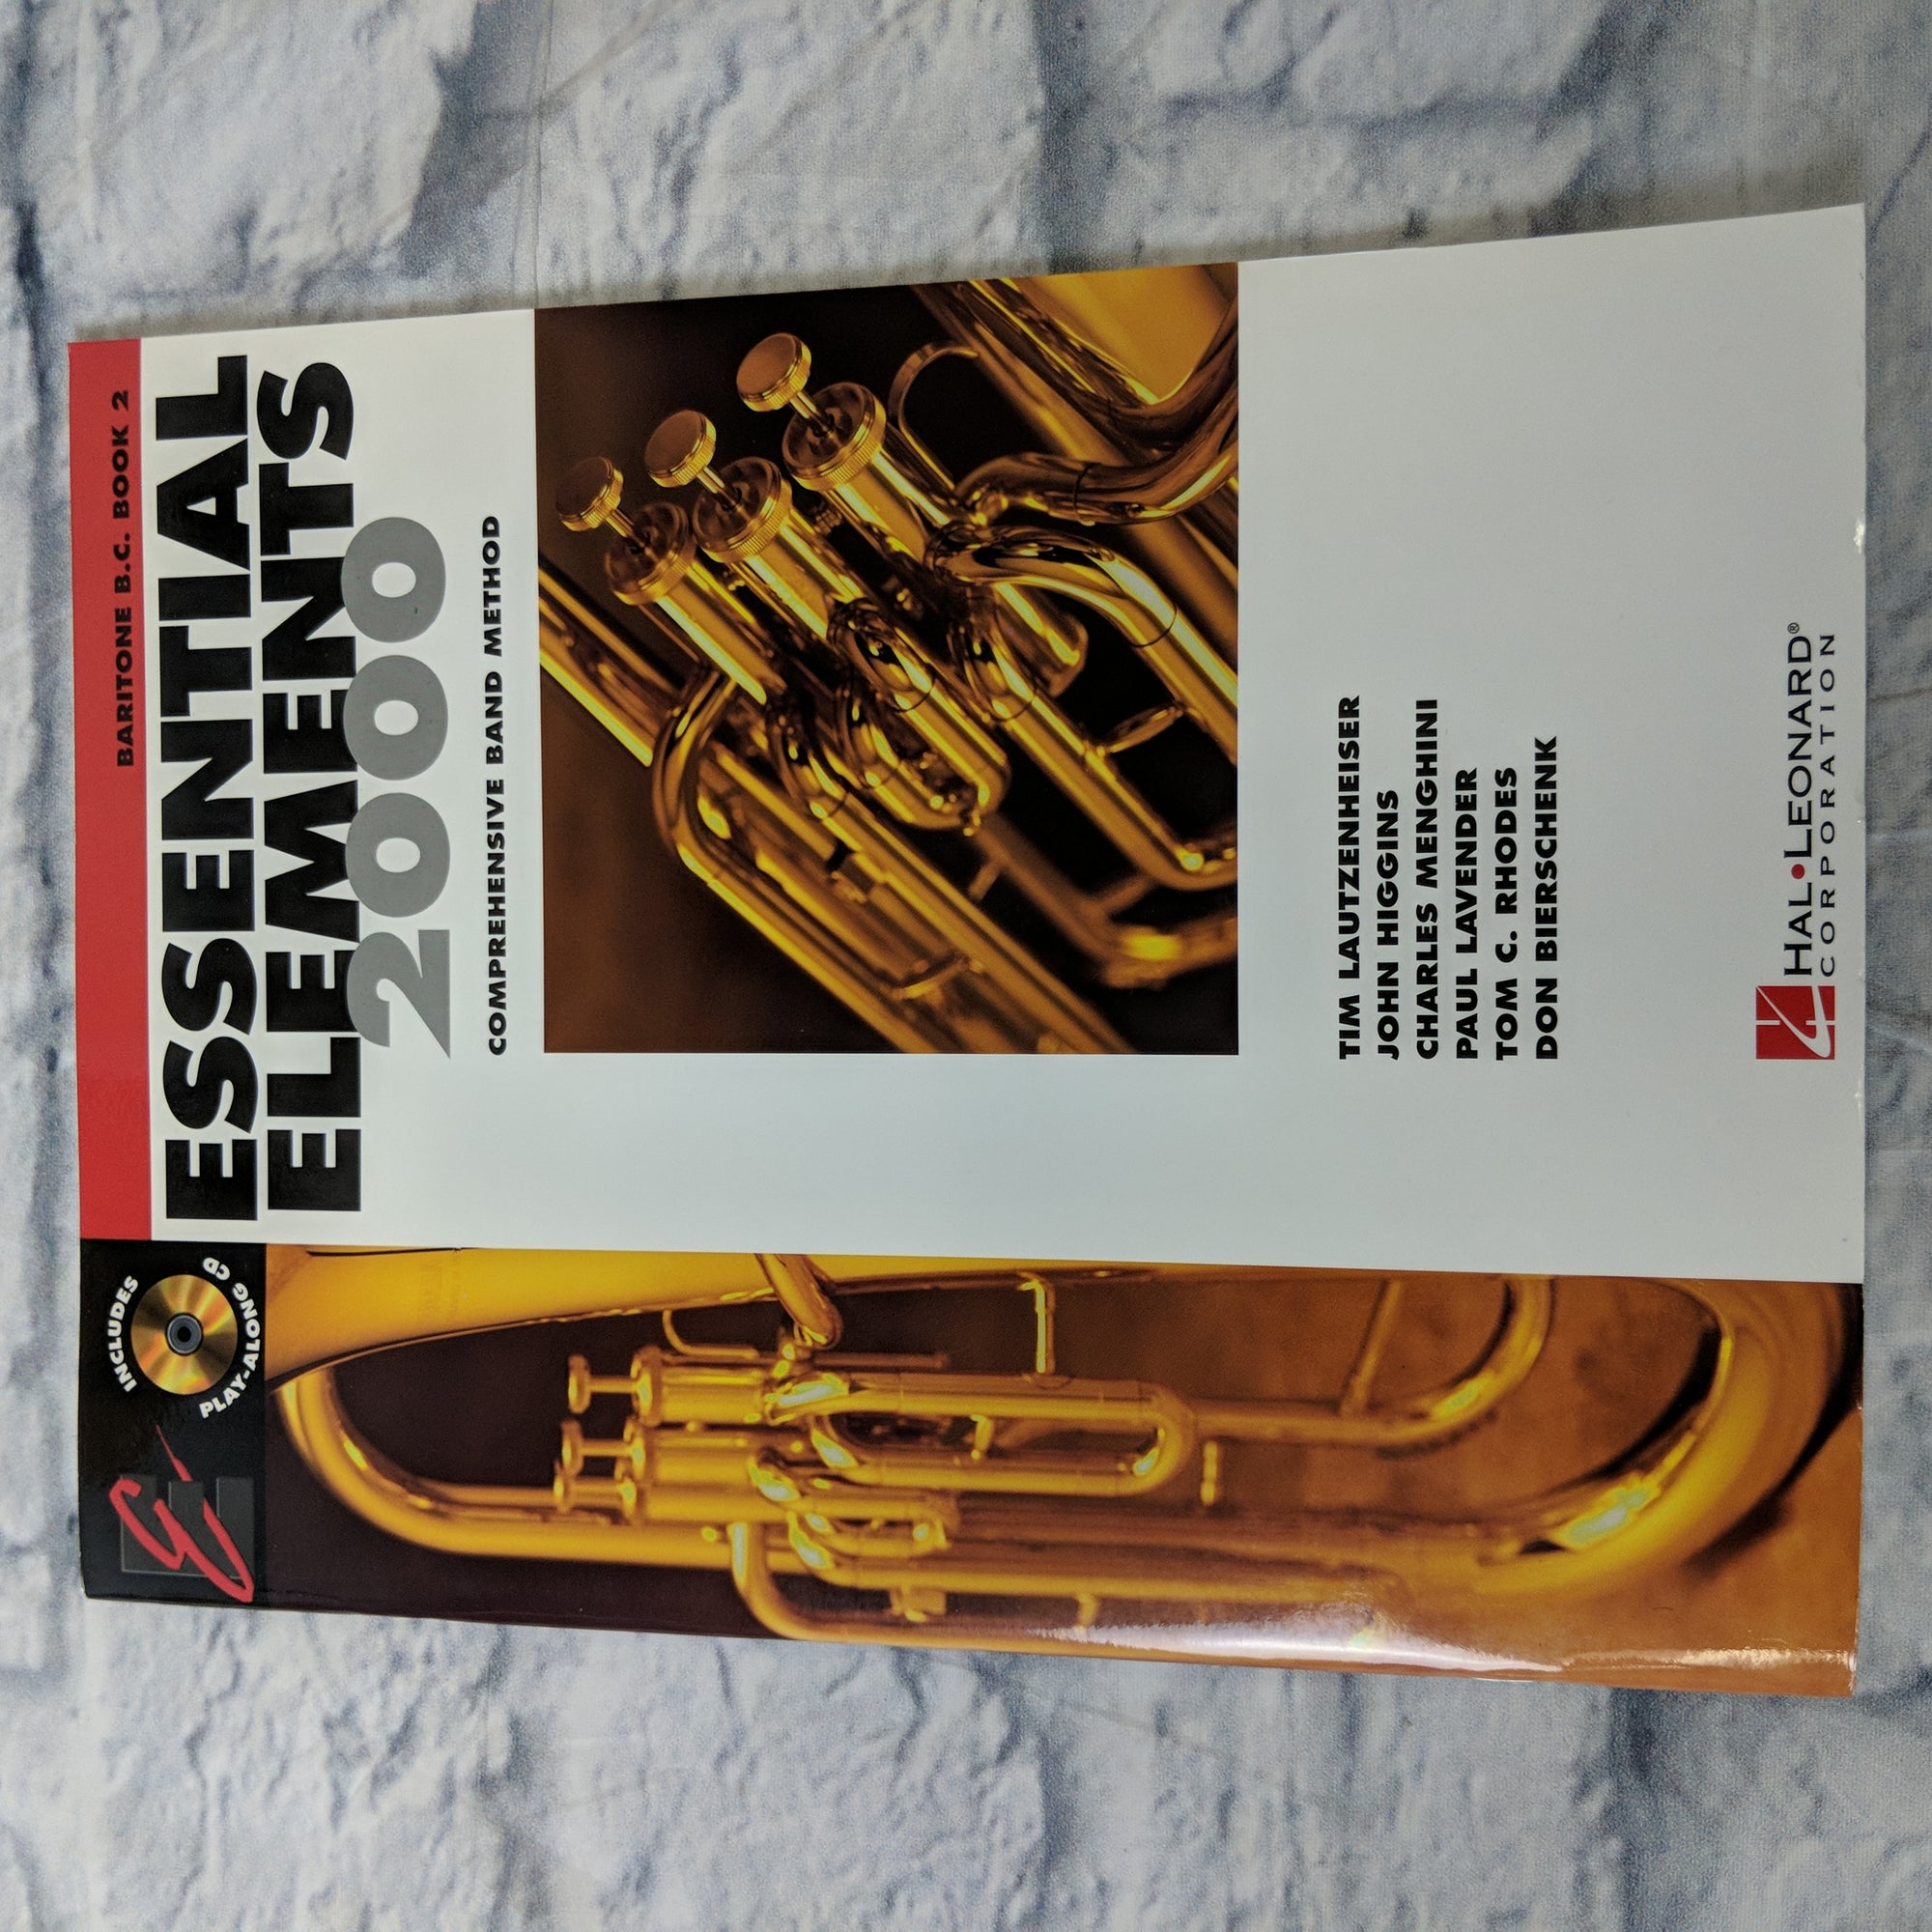 Hal Leonard Essential Elements for Band Percussion Book 1 - Town Center  Music